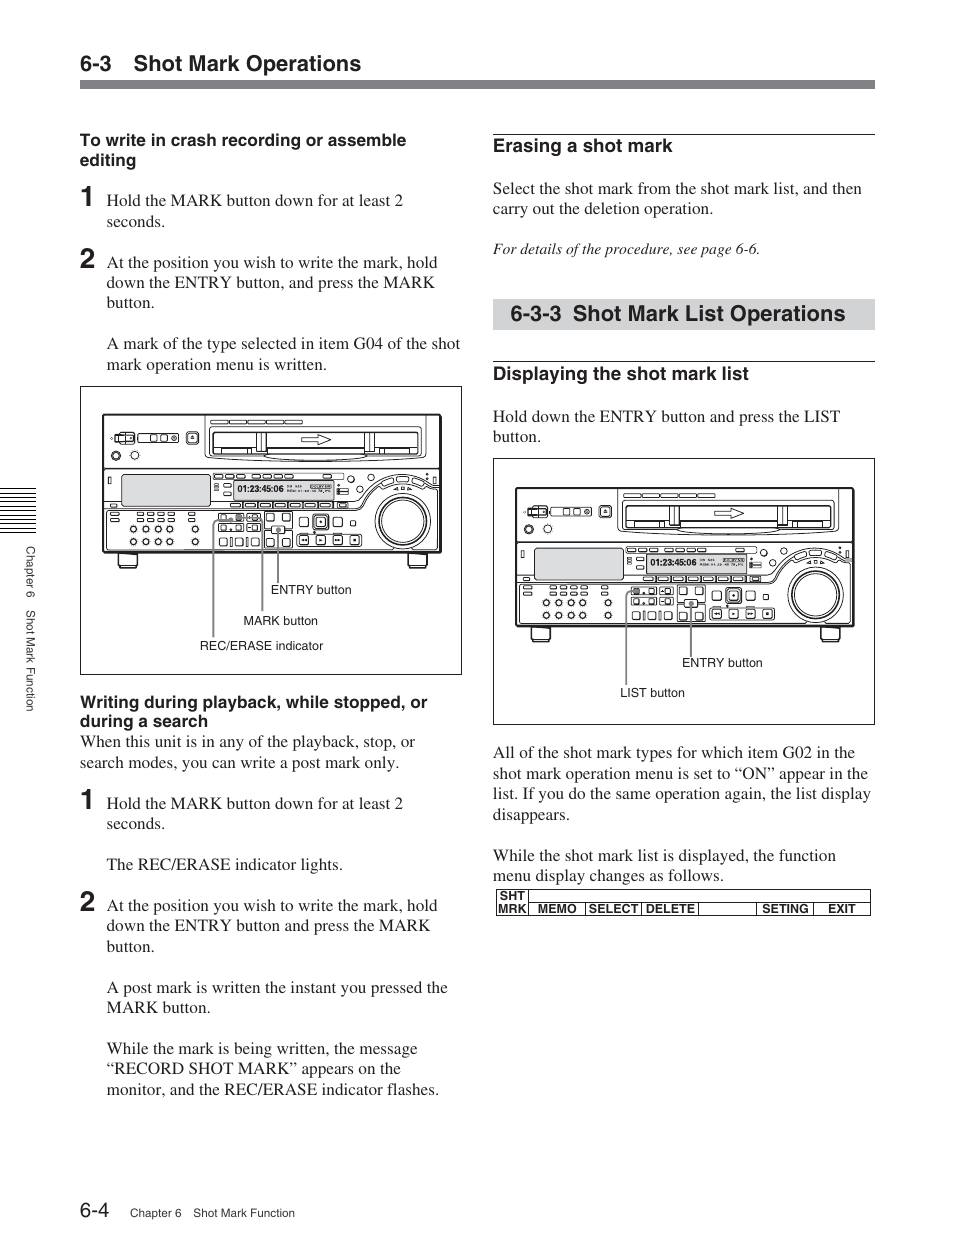 3-3 shot mark list operations, 3 shot mark operations | Sony DVW-2000 User Manual | Page 74 / 155